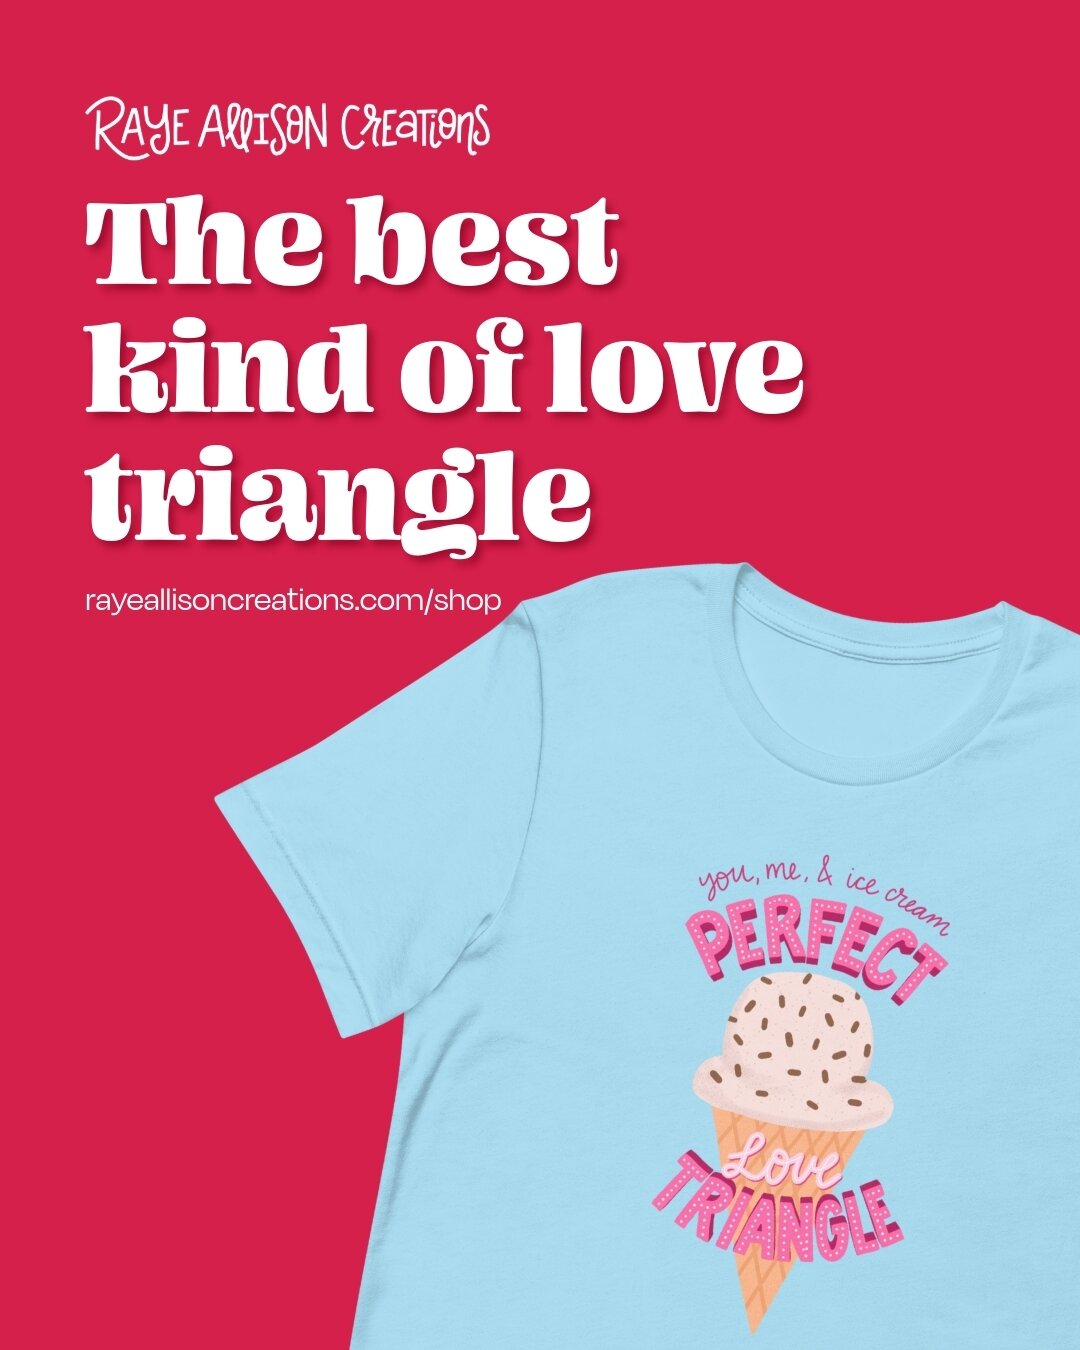 Love triangles are a controversial romance trope. I am not always of fan of love triangles in books, I am definitely a fan of love triangles that involve ice cream.

What are your favorite tropes to write or read?

You can check out everything in the